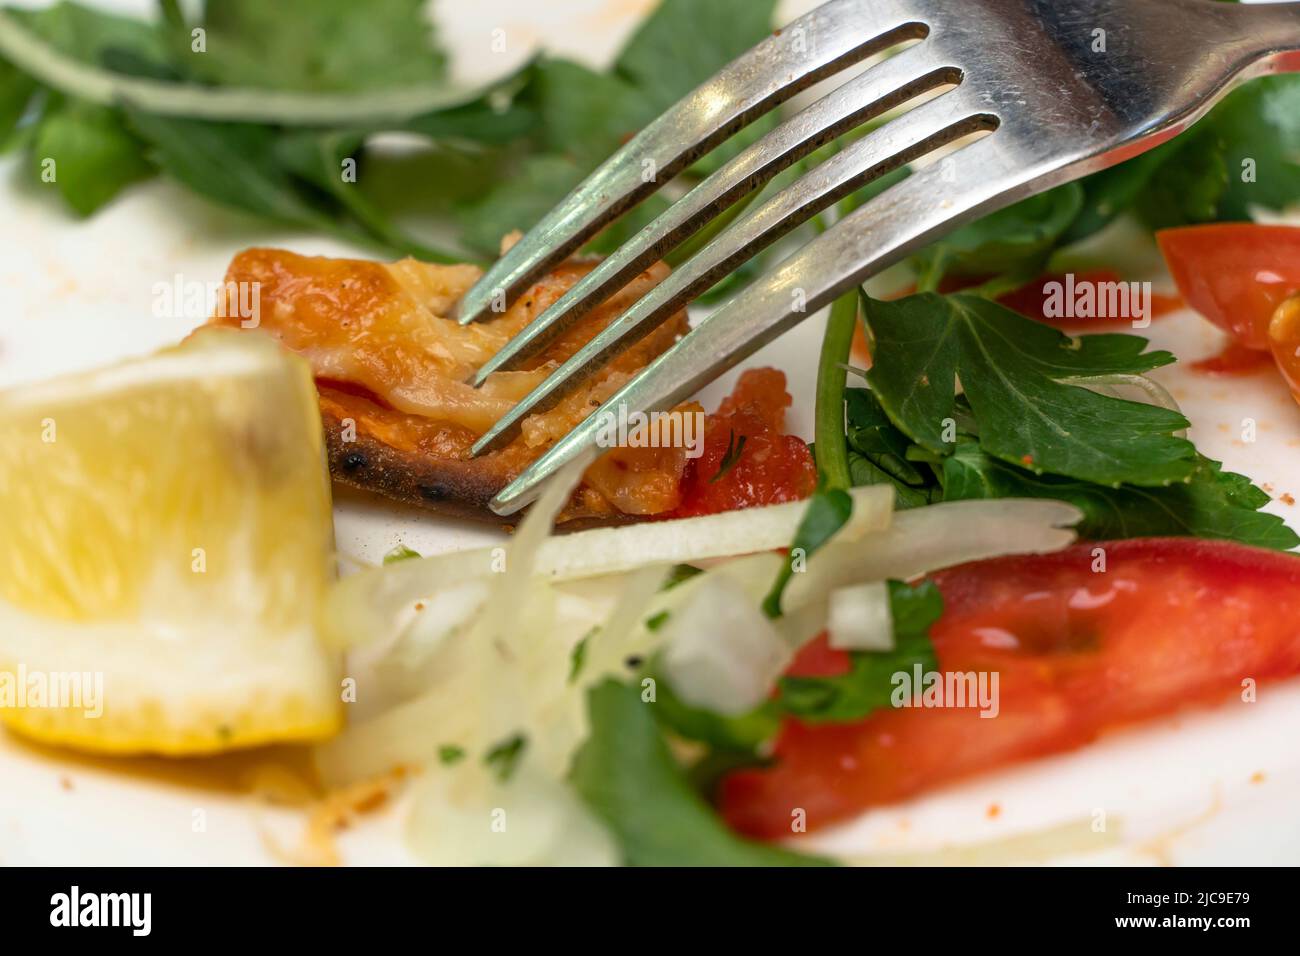 Leftovers on a plate close-up. Eat food with a knife and fork. Delicious lunch, vegetables, proper nutrition. Italian food. Useful menu. Enjoy dinner. Stock Photo